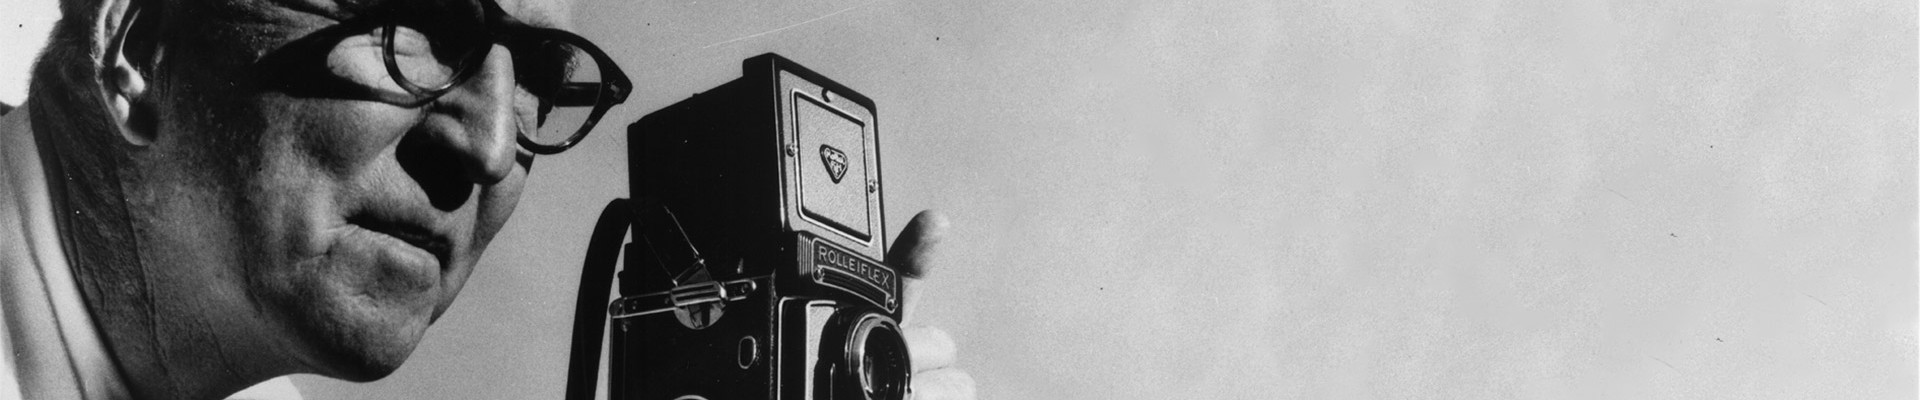 William Sneyd pictured with his Roliflex camera